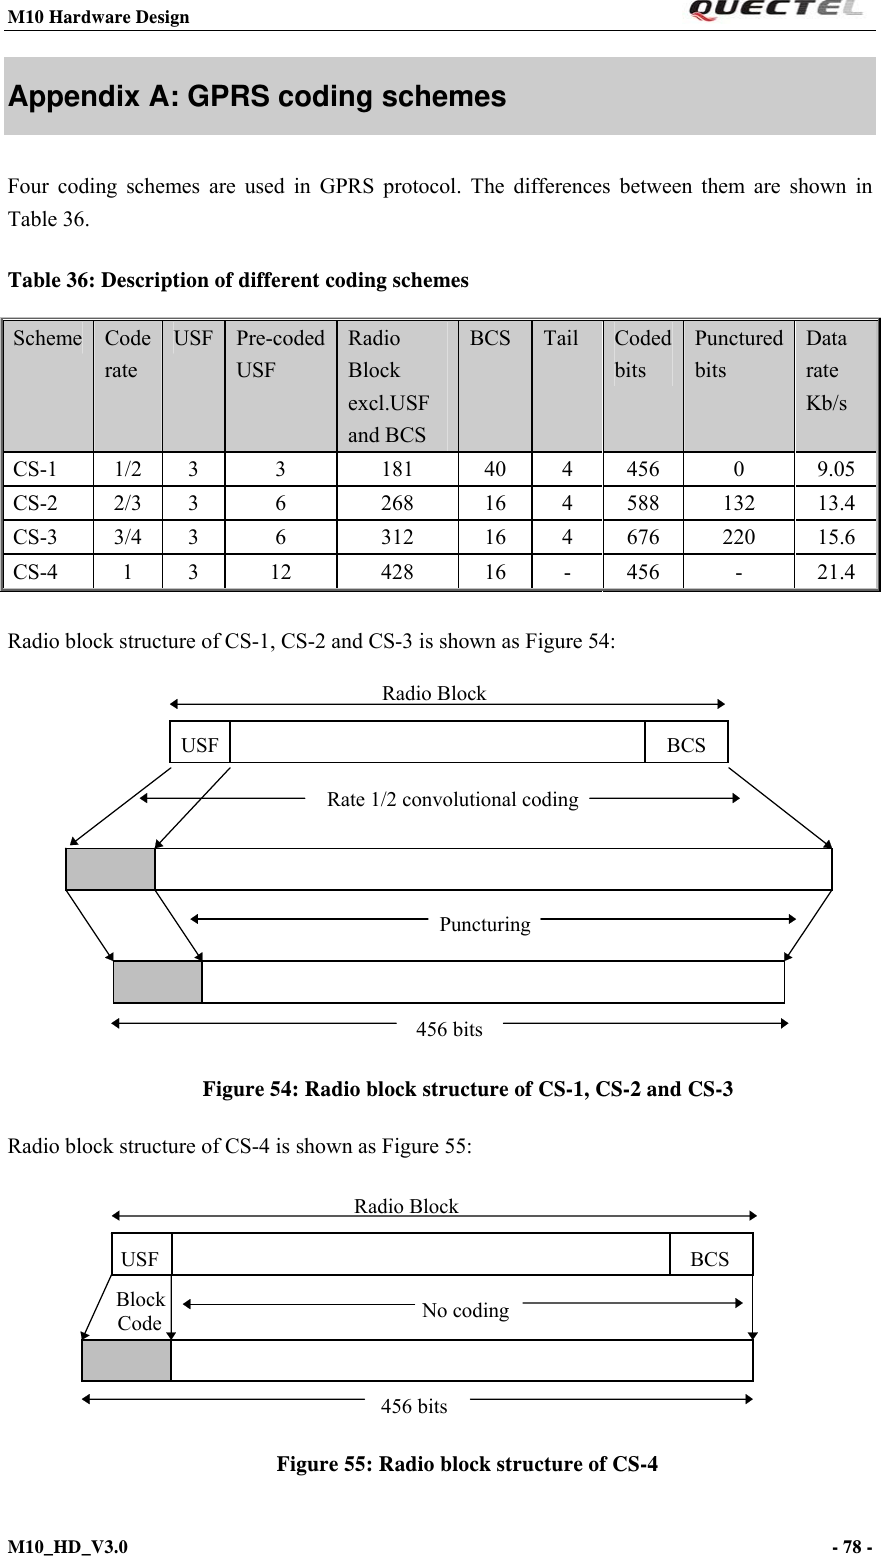 M10 Hardware Design                                                                 M10_HD_V3.0                                                                      - 78 -  Appendix A: GPRS coding schemes Four coding schemes are used in GPRS protocol. The differences between them are shown in Table 36. Table 36: Description of different coding schemes Scheme  Code rate USF  Pre-coded USF Radio Block excl.USF and BCS BCS  Tail  Coded bits Punctured bits Data rate Kb/s CS-1 1/2 3  3  181  40 4 456  0  9.05 CS-2 2/3 3  6  268  16 4 588  132  13.4 CS-3 3/4 3  6  312  16 4 676  220  15.6 CS-4 1 3  12  428  16 - 456  -  21.4  Radio block structure of CS-1, CS-2 and CS-3 is shown as Figure 54:                     Figure 54: Radio block structure of CS-1, CS-2 and CS-3 Radio block structure of CS-4 is shown as Figure 55:              Figure 55: Radio block structure of CS-4 Rate 1/2 convolutional codingPuncturing456 bitsUSF BCS Radio BlockBlock Code No coding456 bitsUSF BCSRadio Block